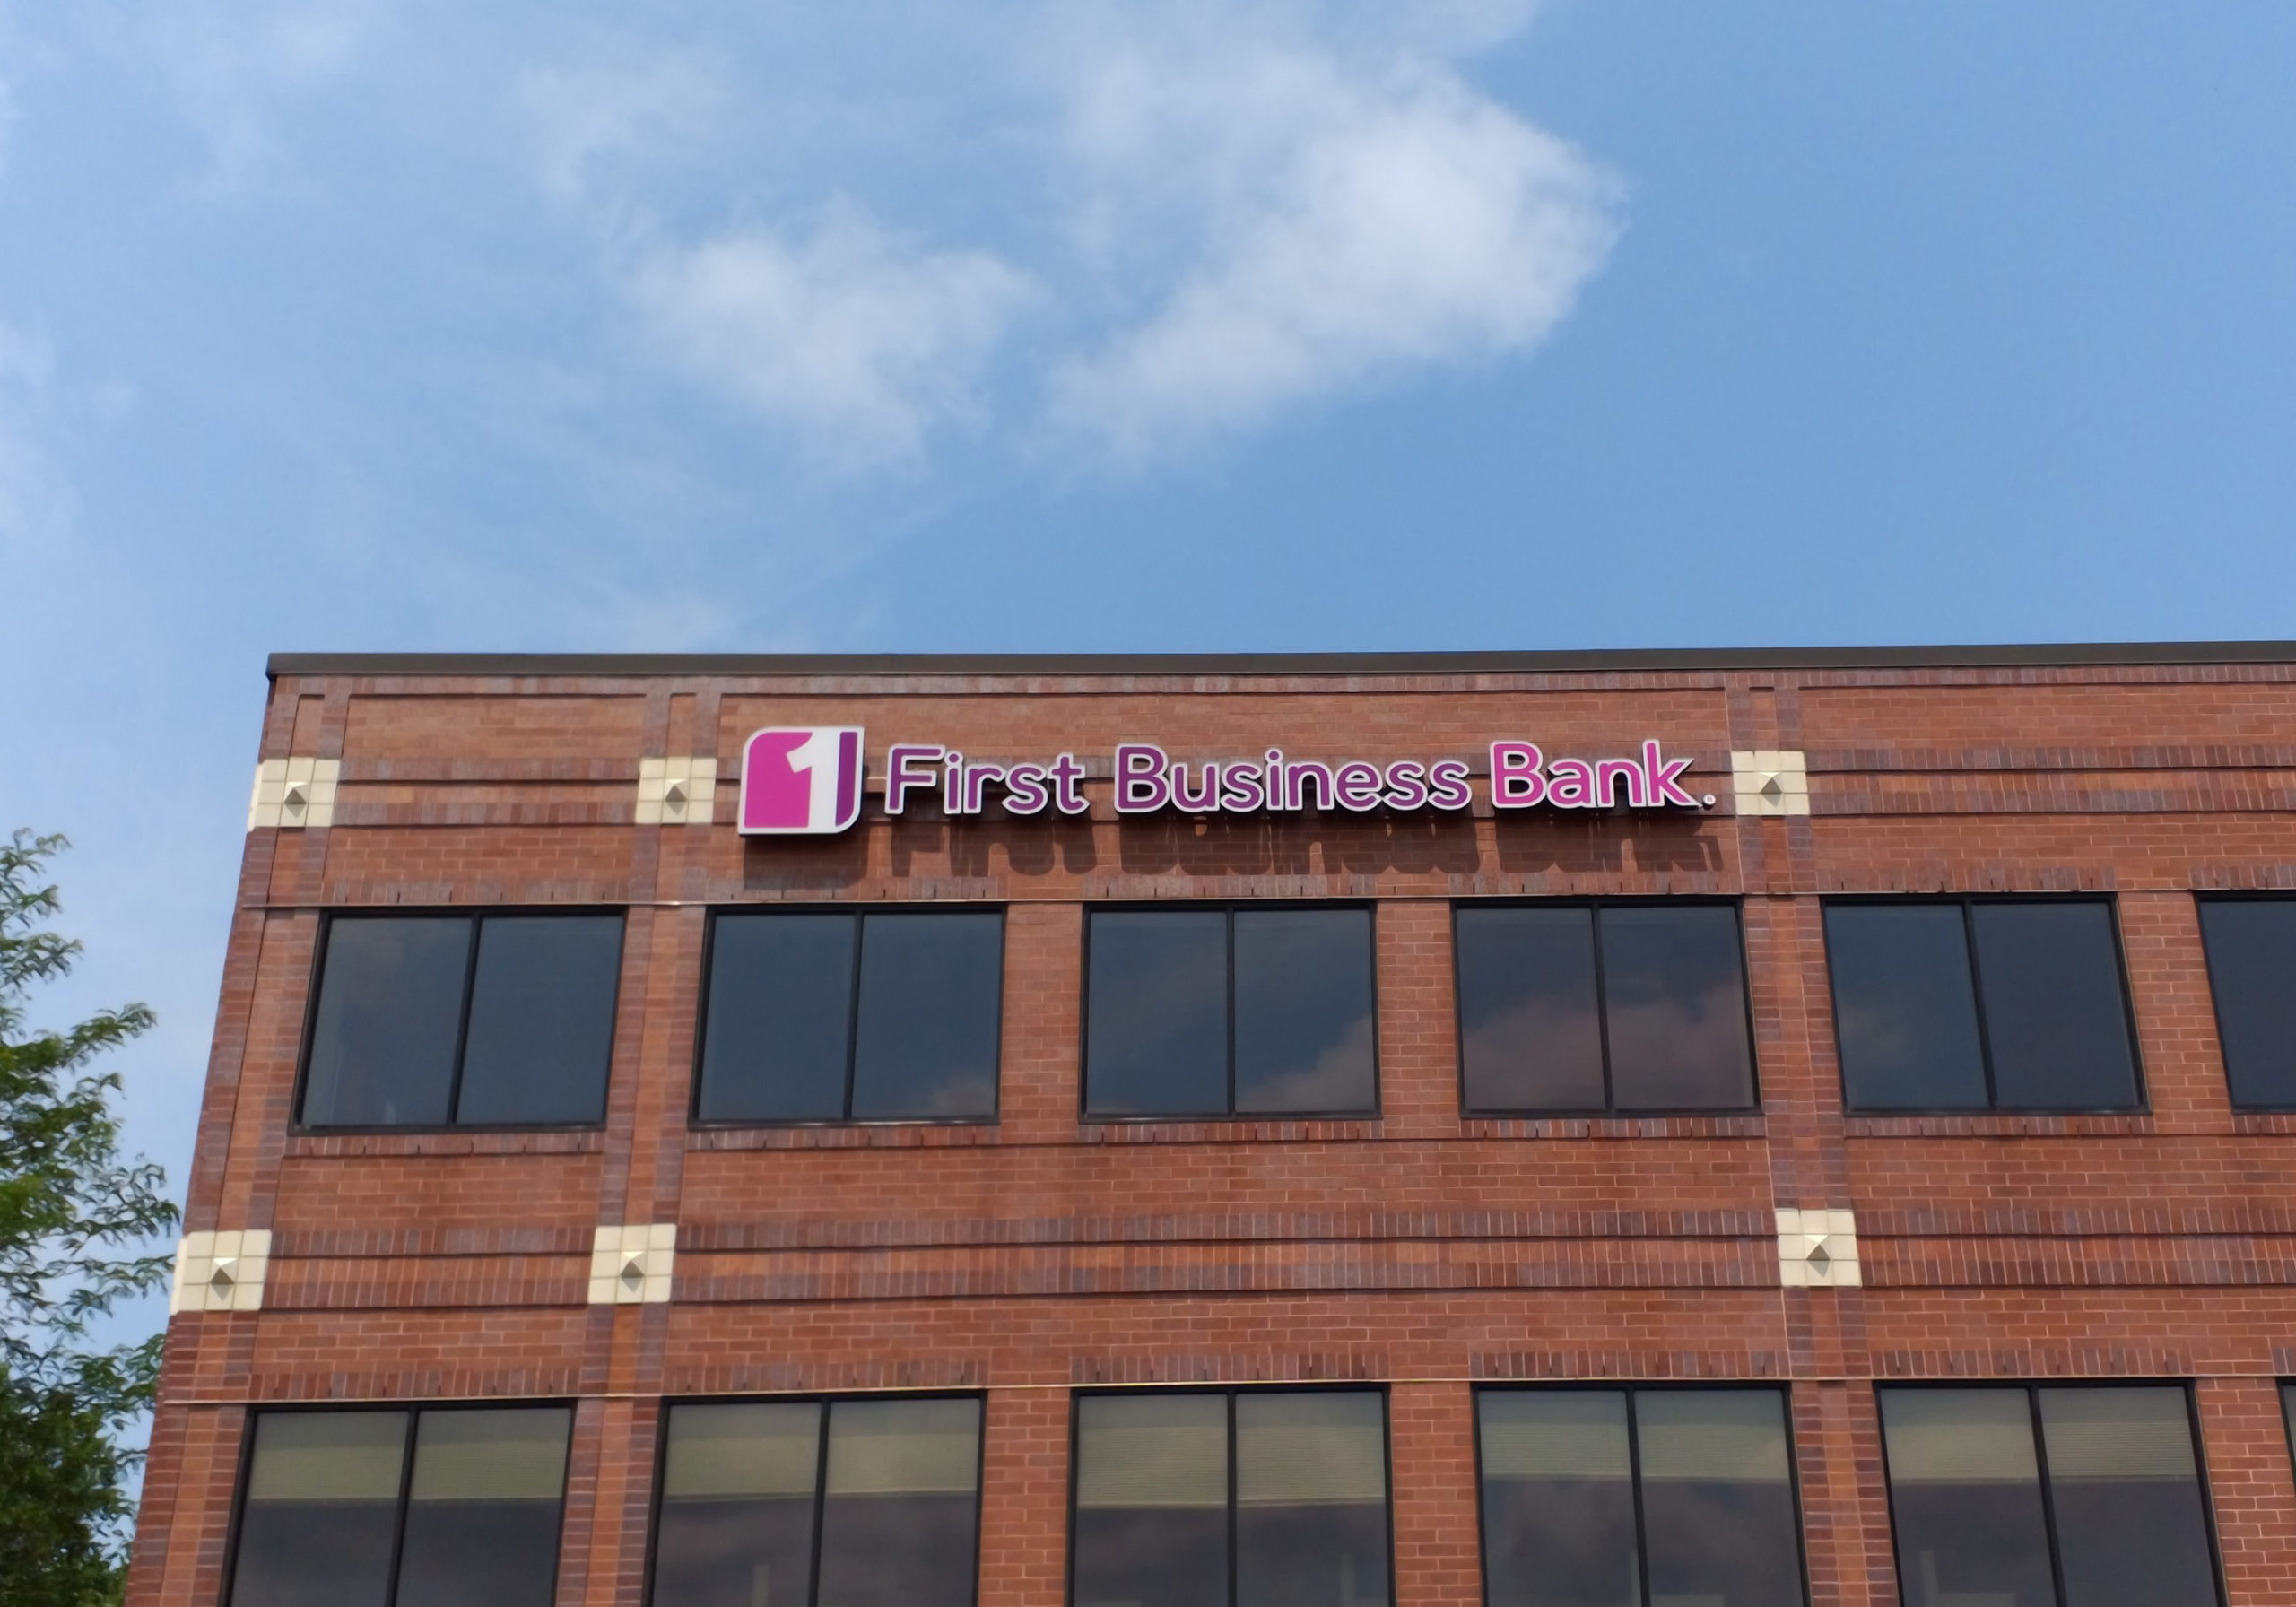 first business bank business sign